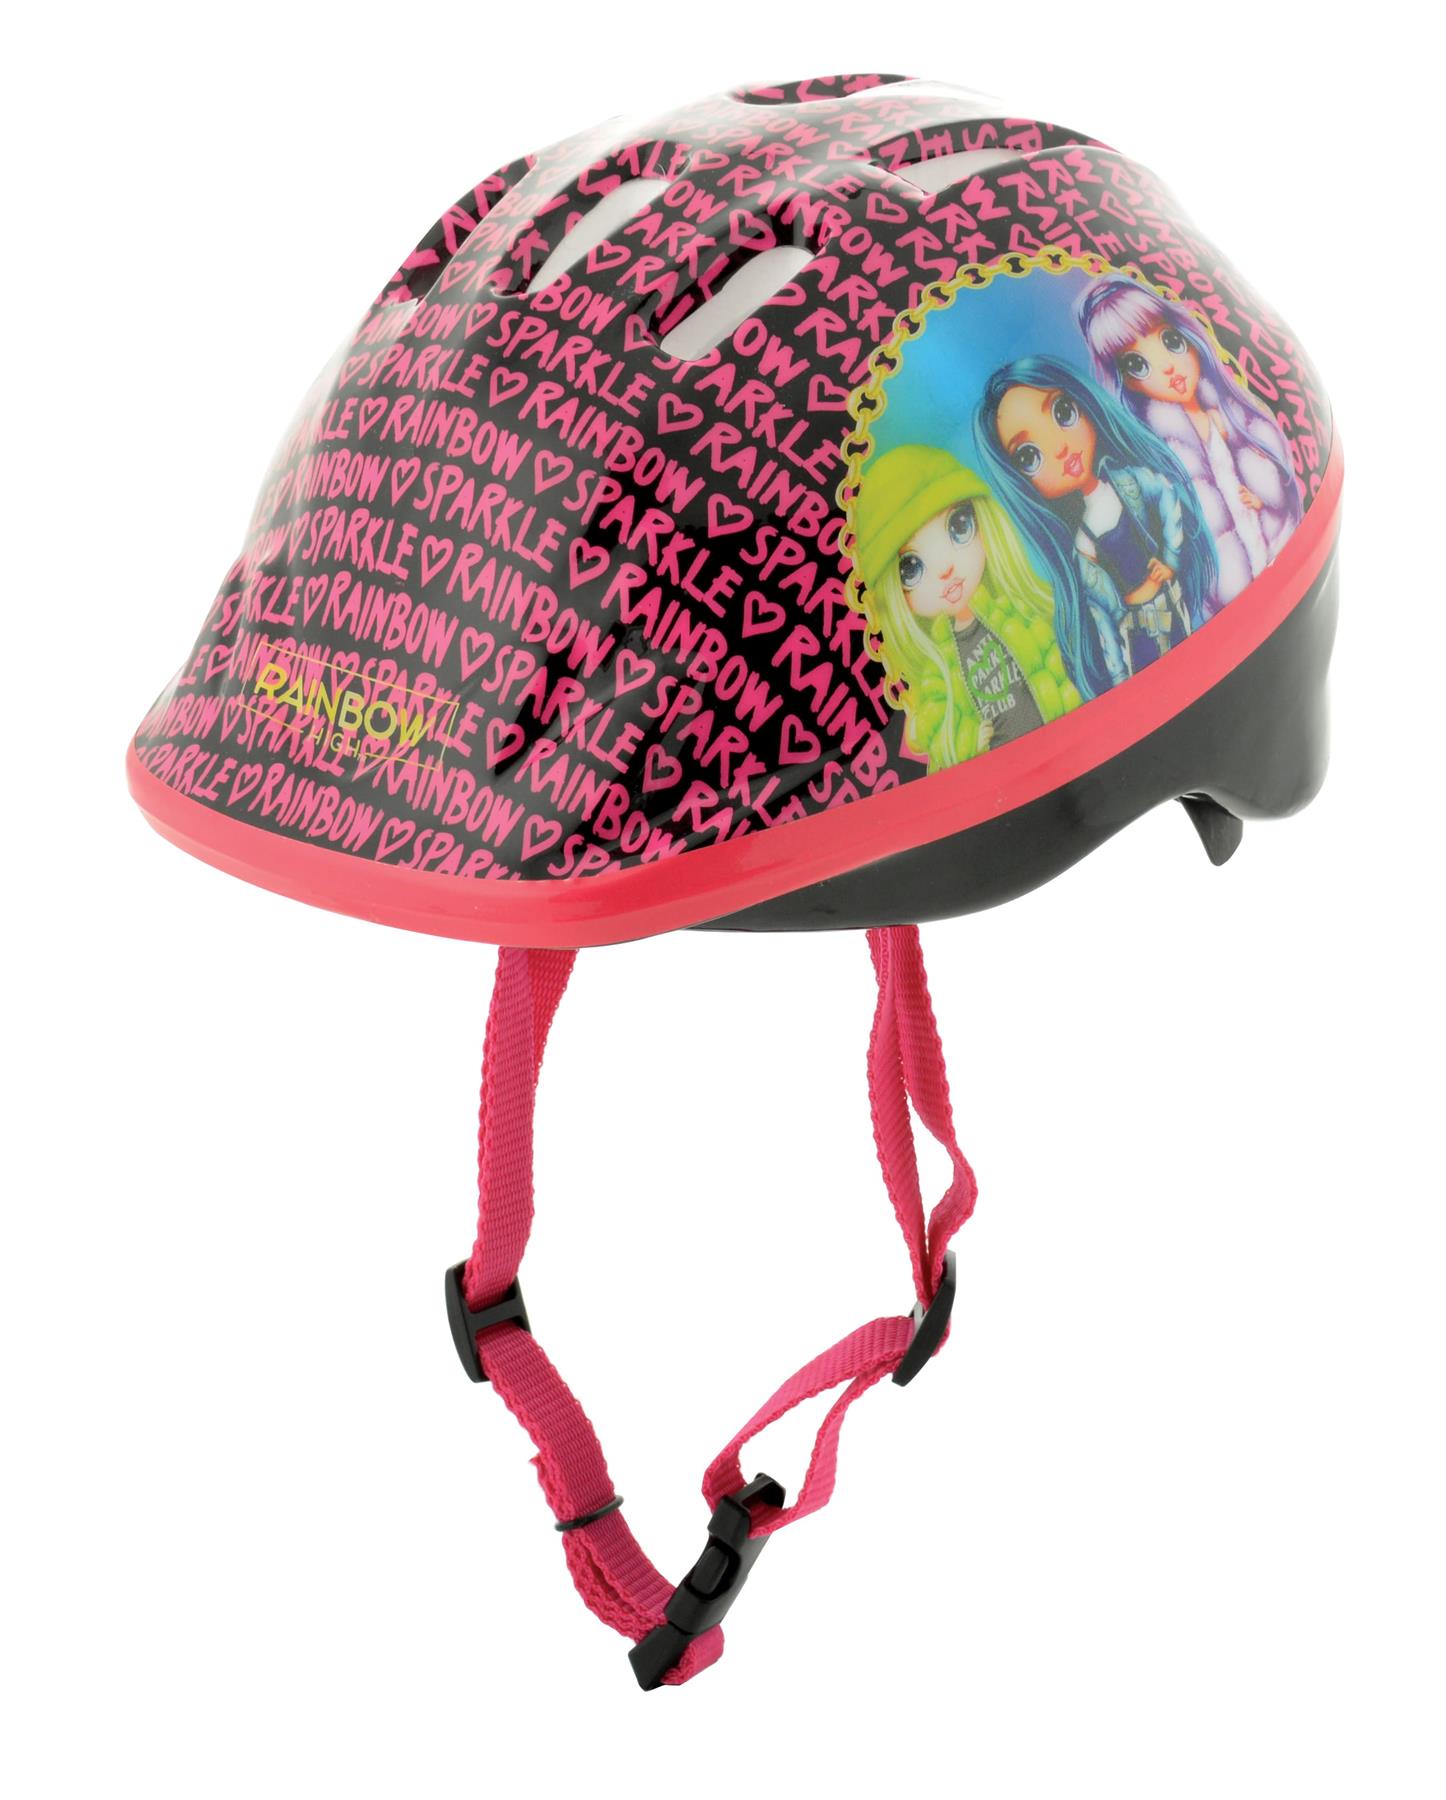 Rainbow High Safety Helmet from Bargain Max